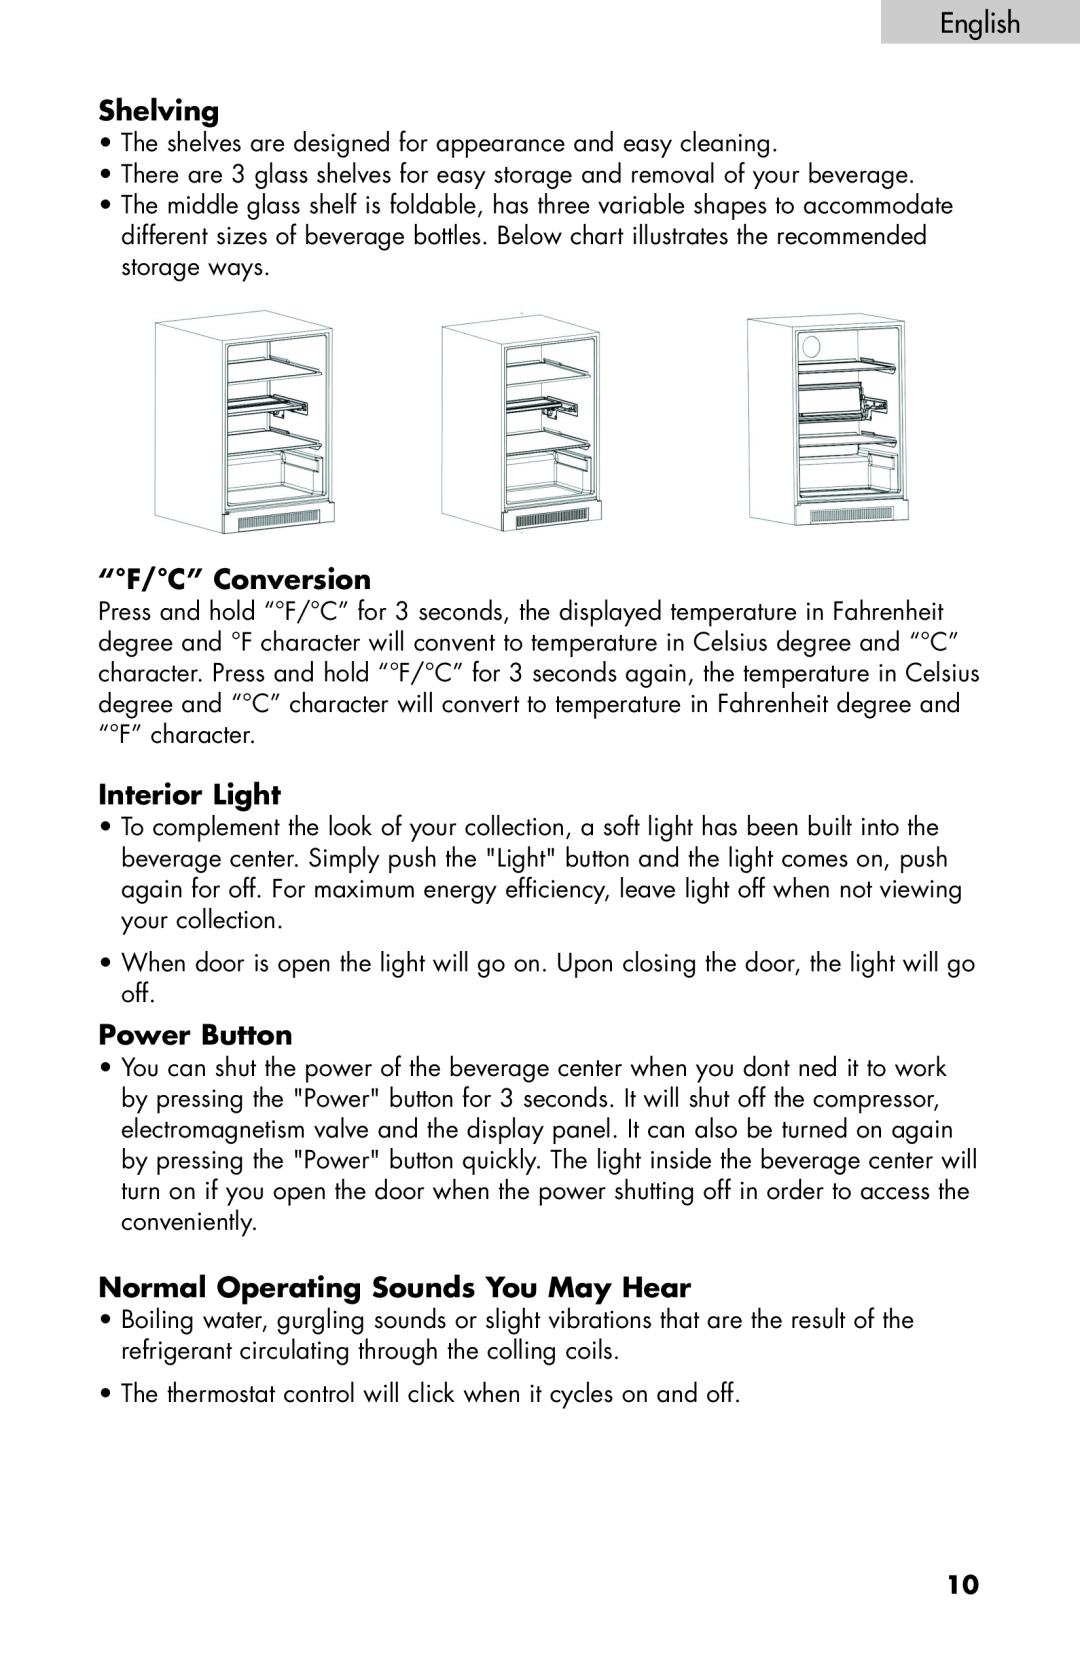 Haier BC100GS user manual Shelving, “F/C” Conversion, Interior Light, Power Button, Normal Operating Sounds You May Hear 